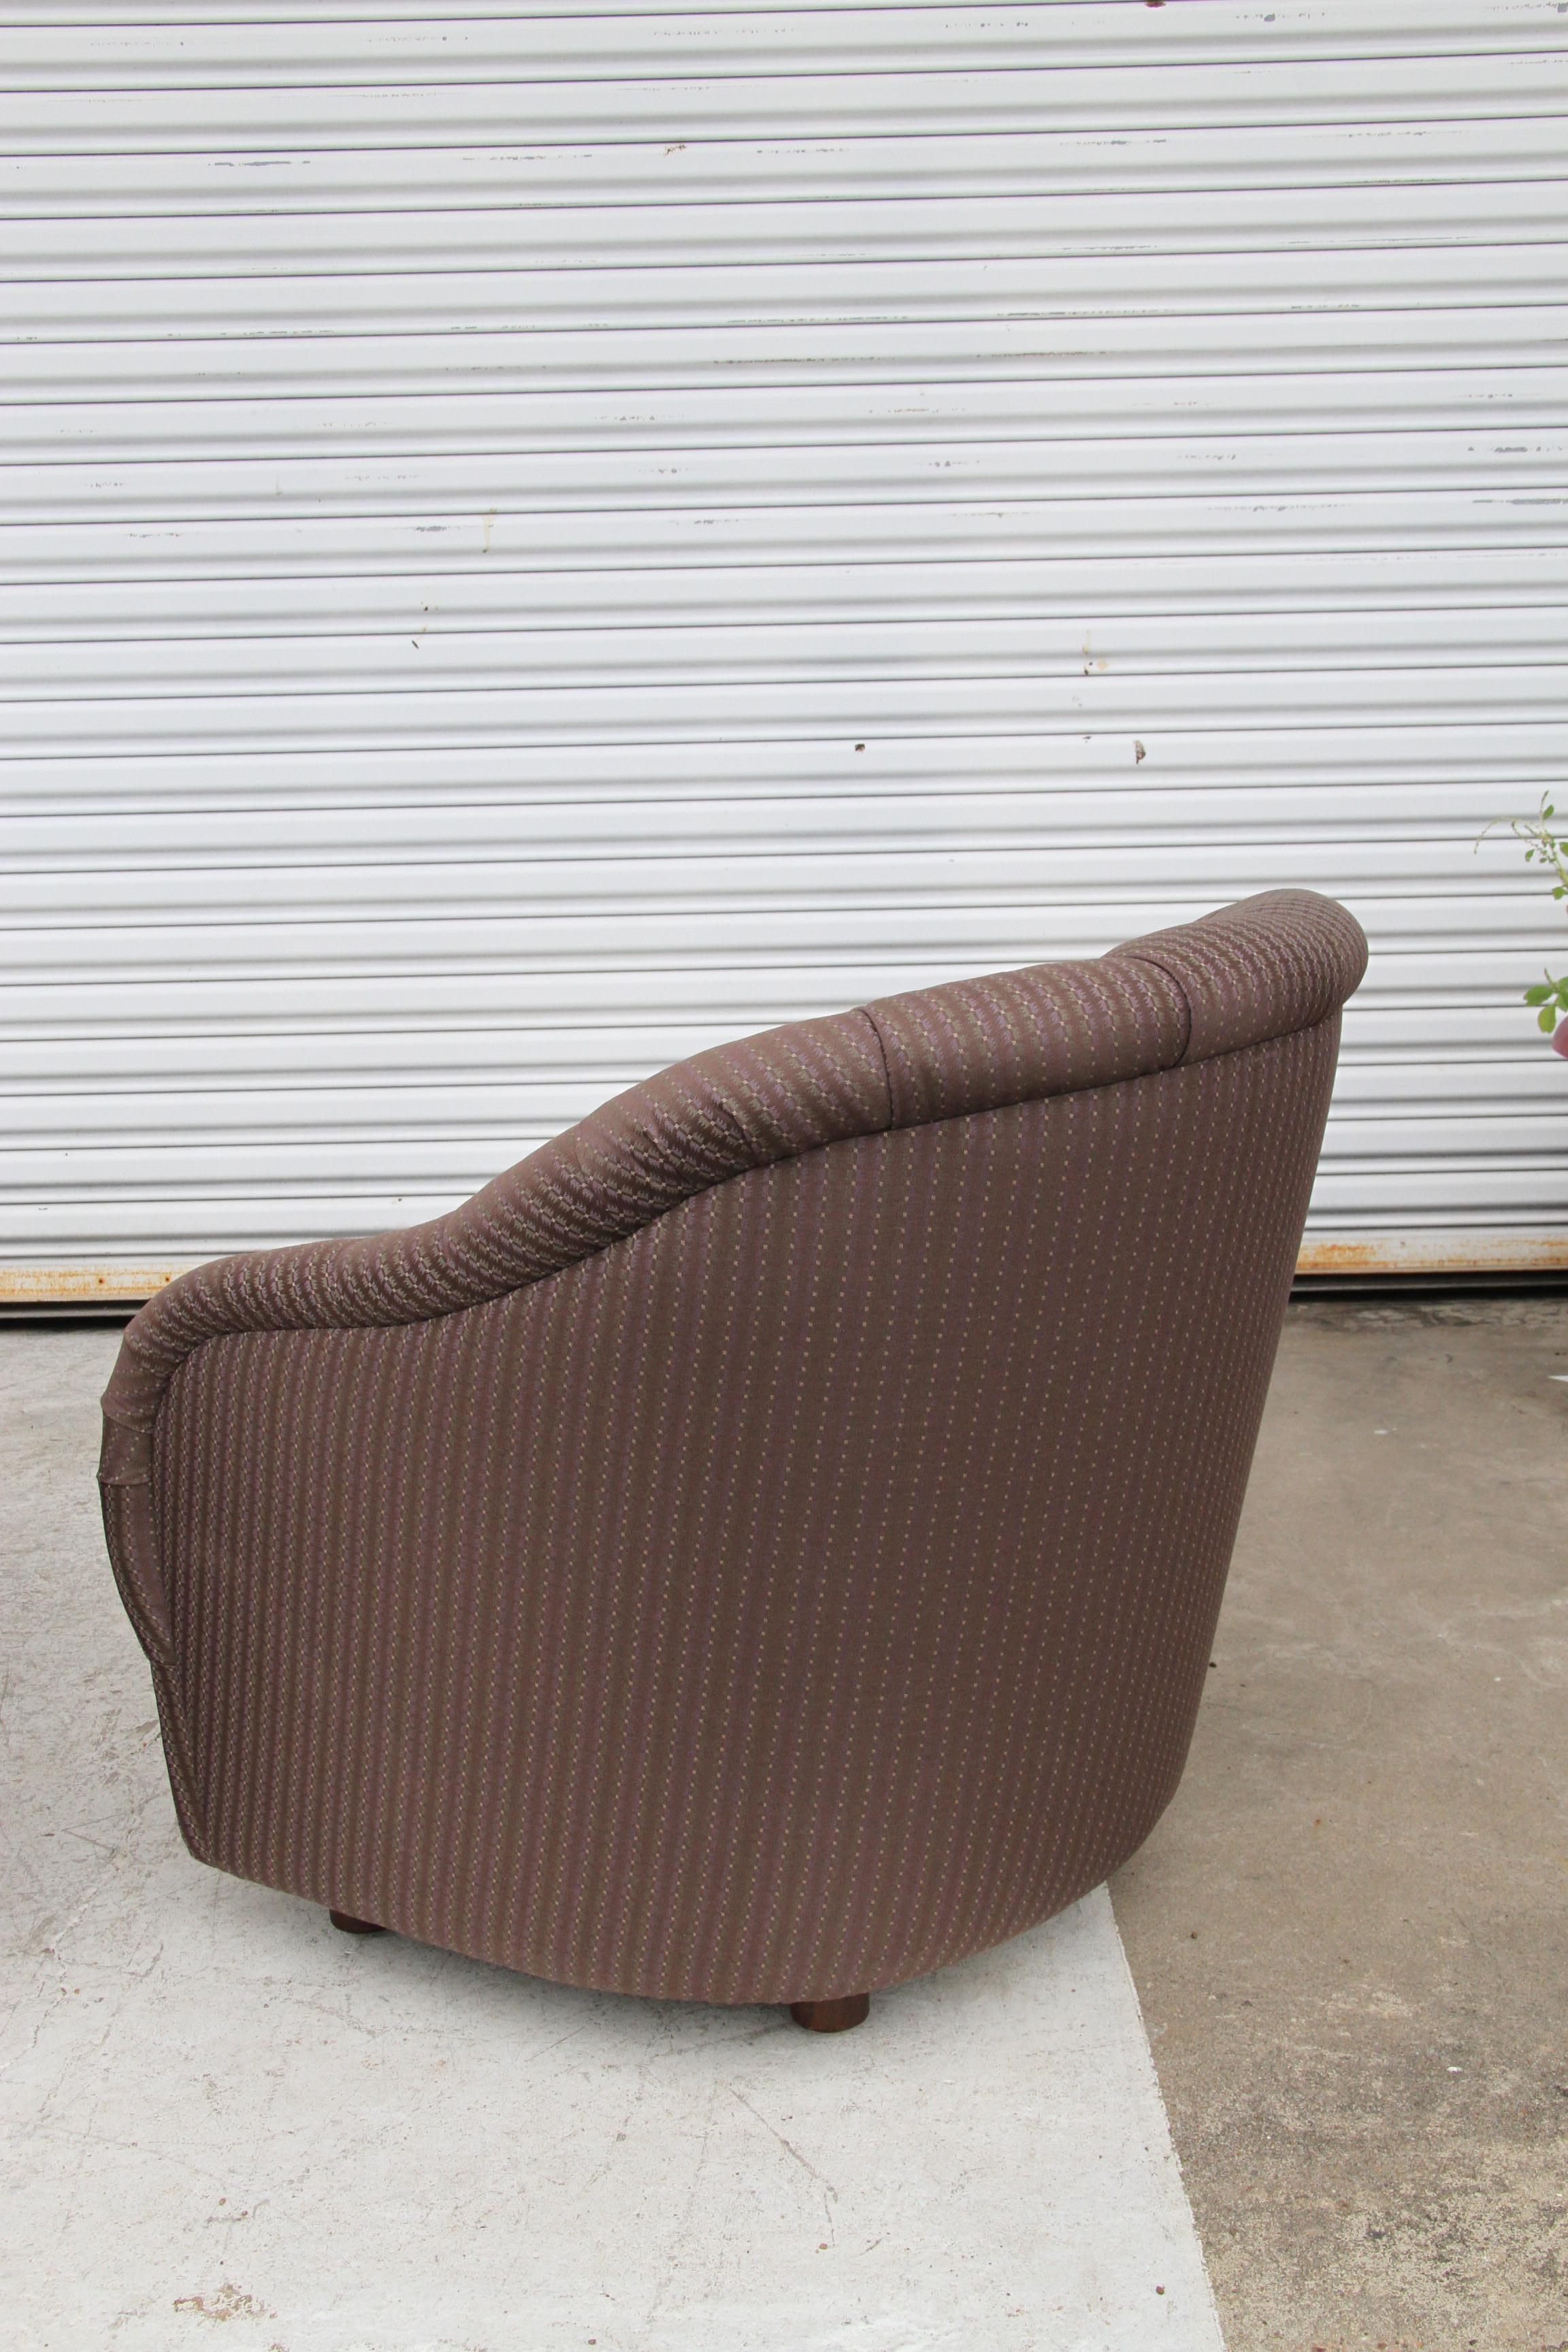 1 Ward Bennett Tufted Lounge Chair For Sale 3